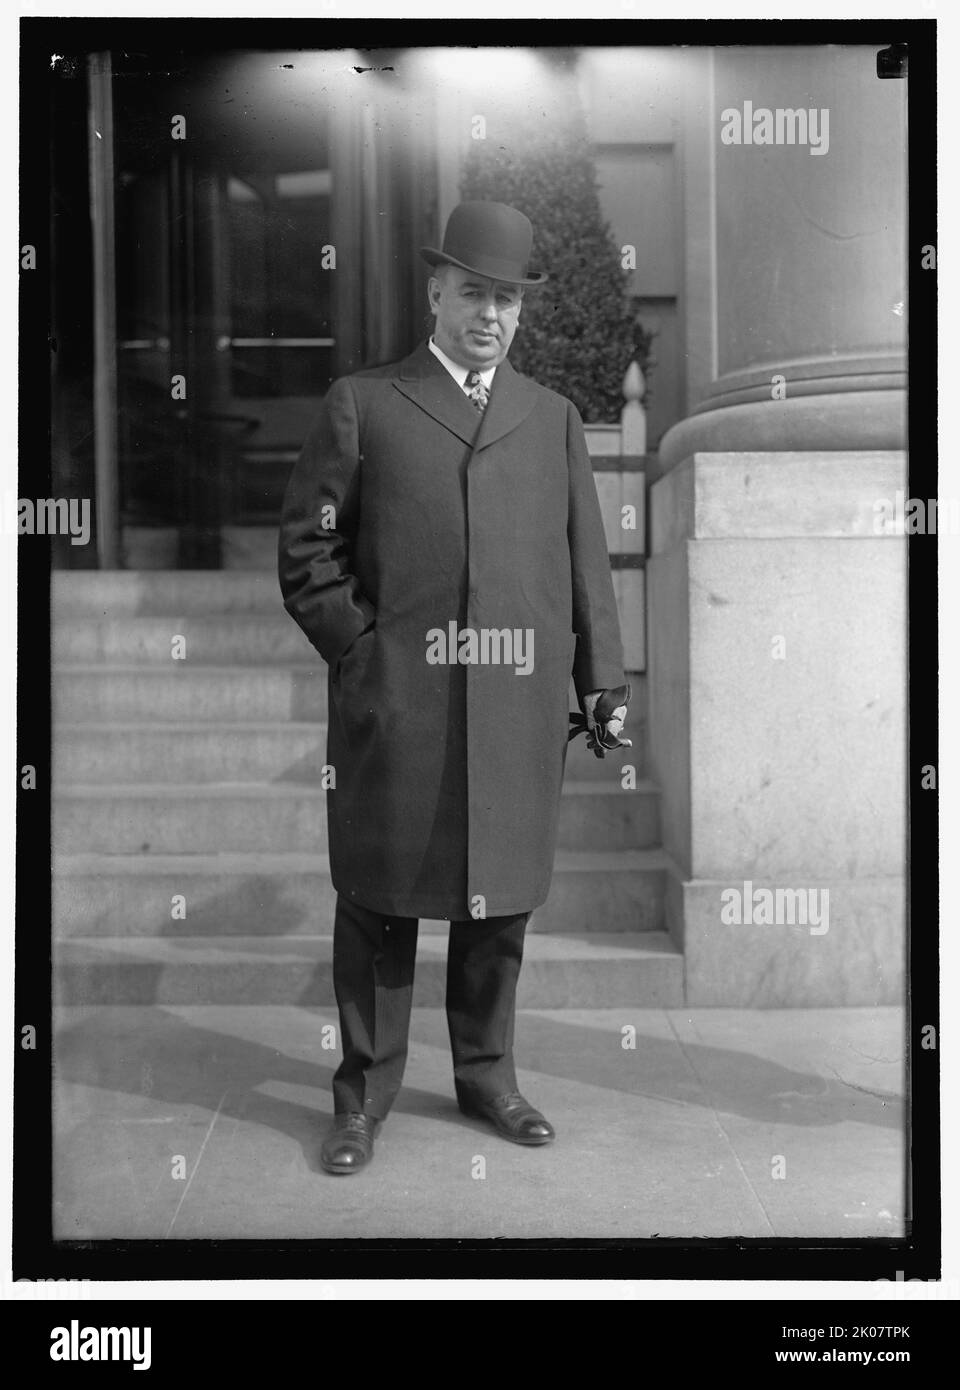 William Hale Thompson, Mayor of Chicago, between 1911 and 1917. American politician known as Big Bill, famed as one the most unethical mayors in American history, mainly for his open alliance with gangster Al Capone. Stock Photo